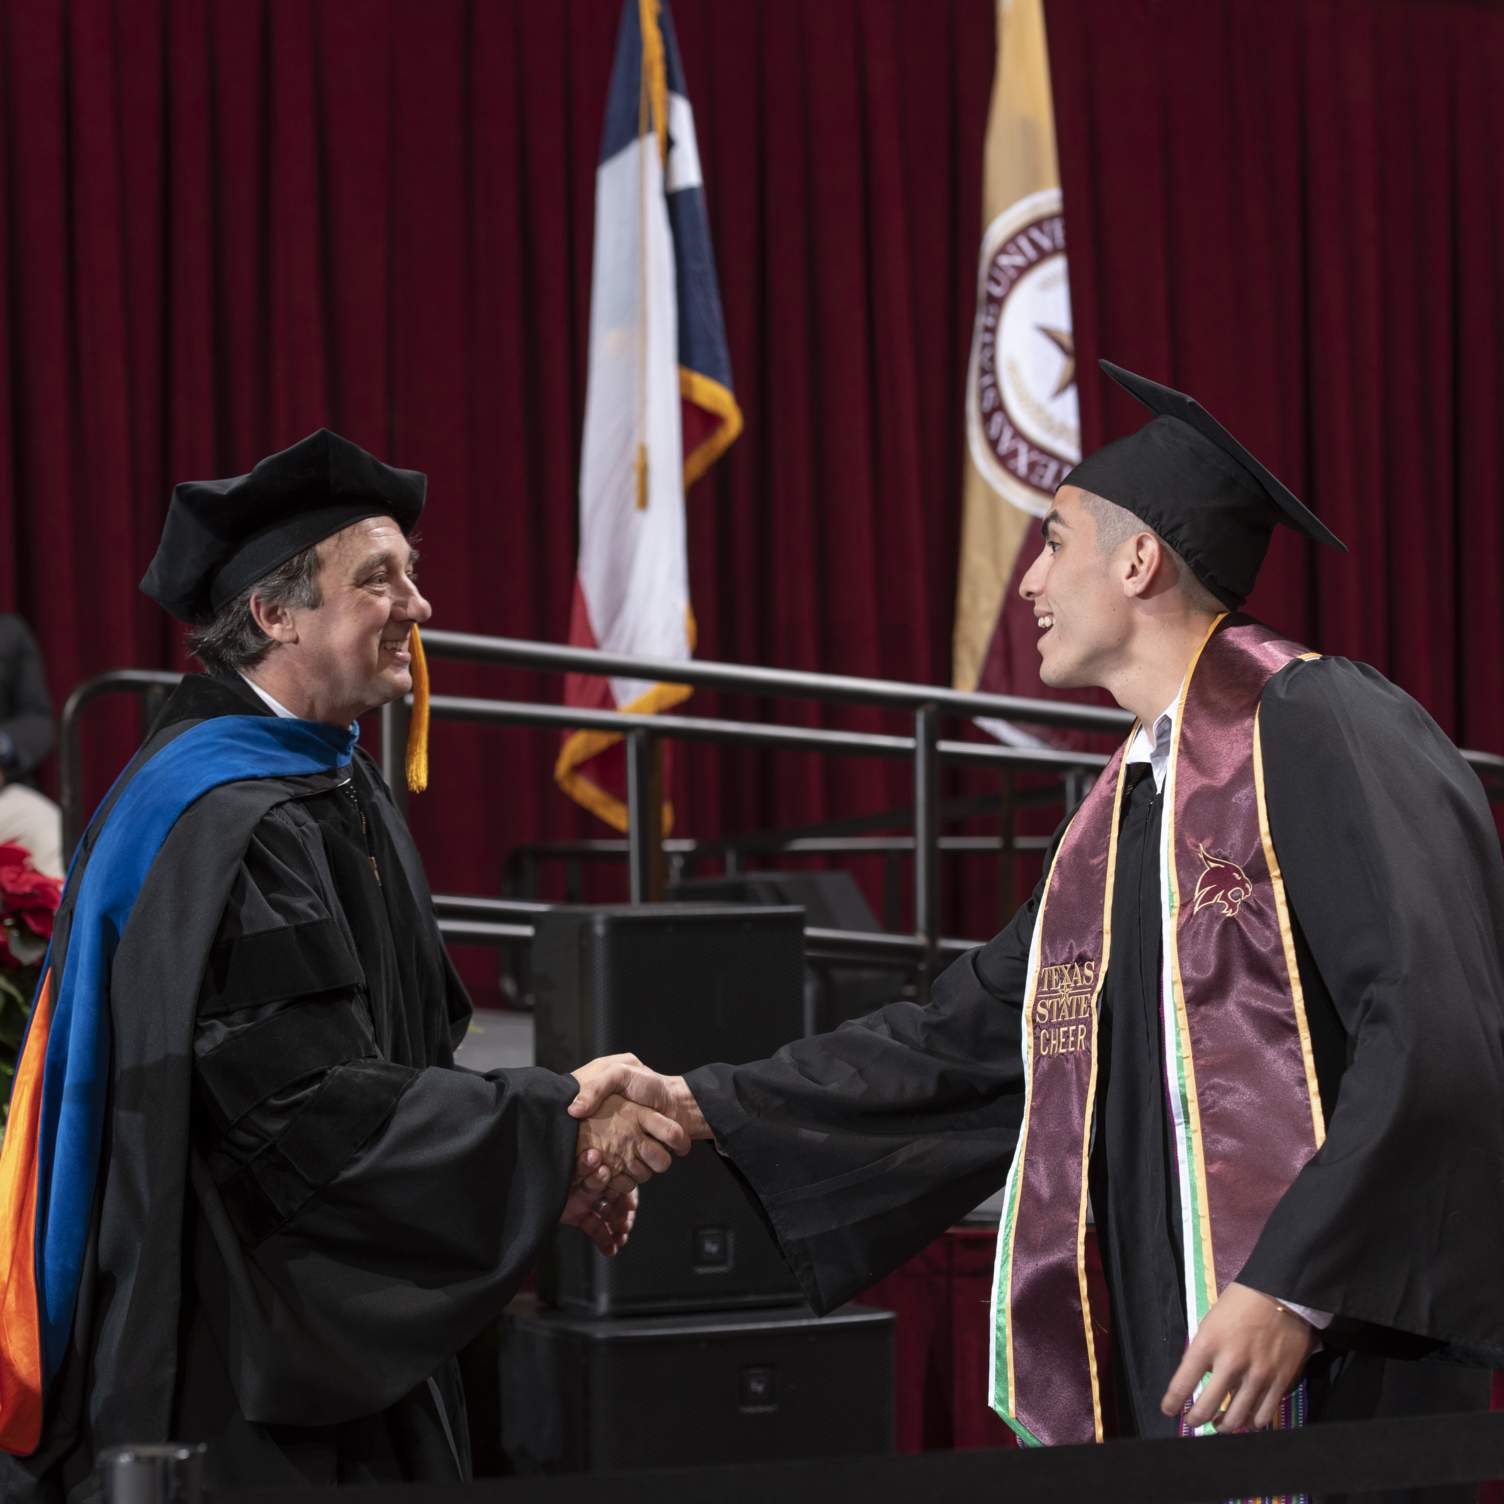 graduate shaking hands with Dean Fleming